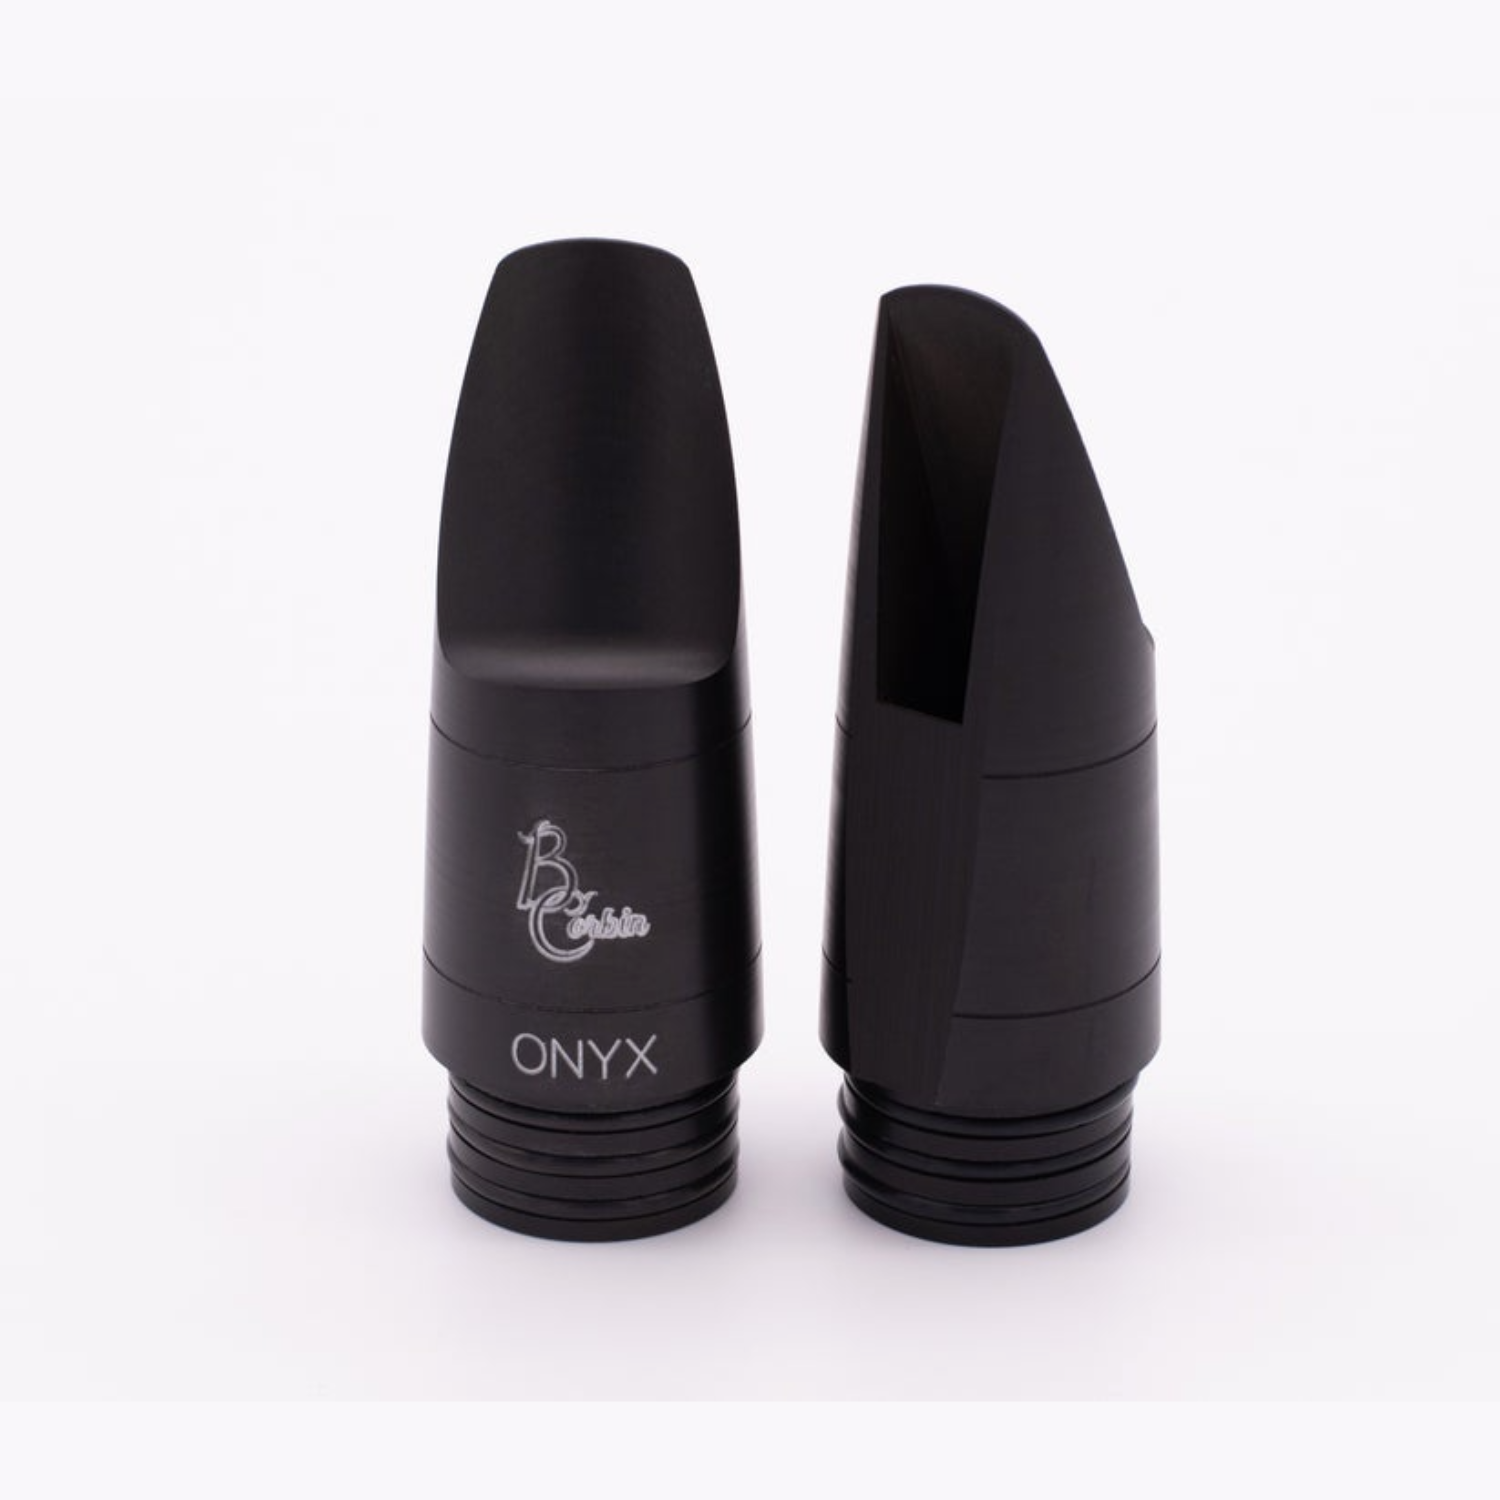 Two Corbin Onyx bass clarinet mouthpieces, one turned around to show the table and window, against a white background